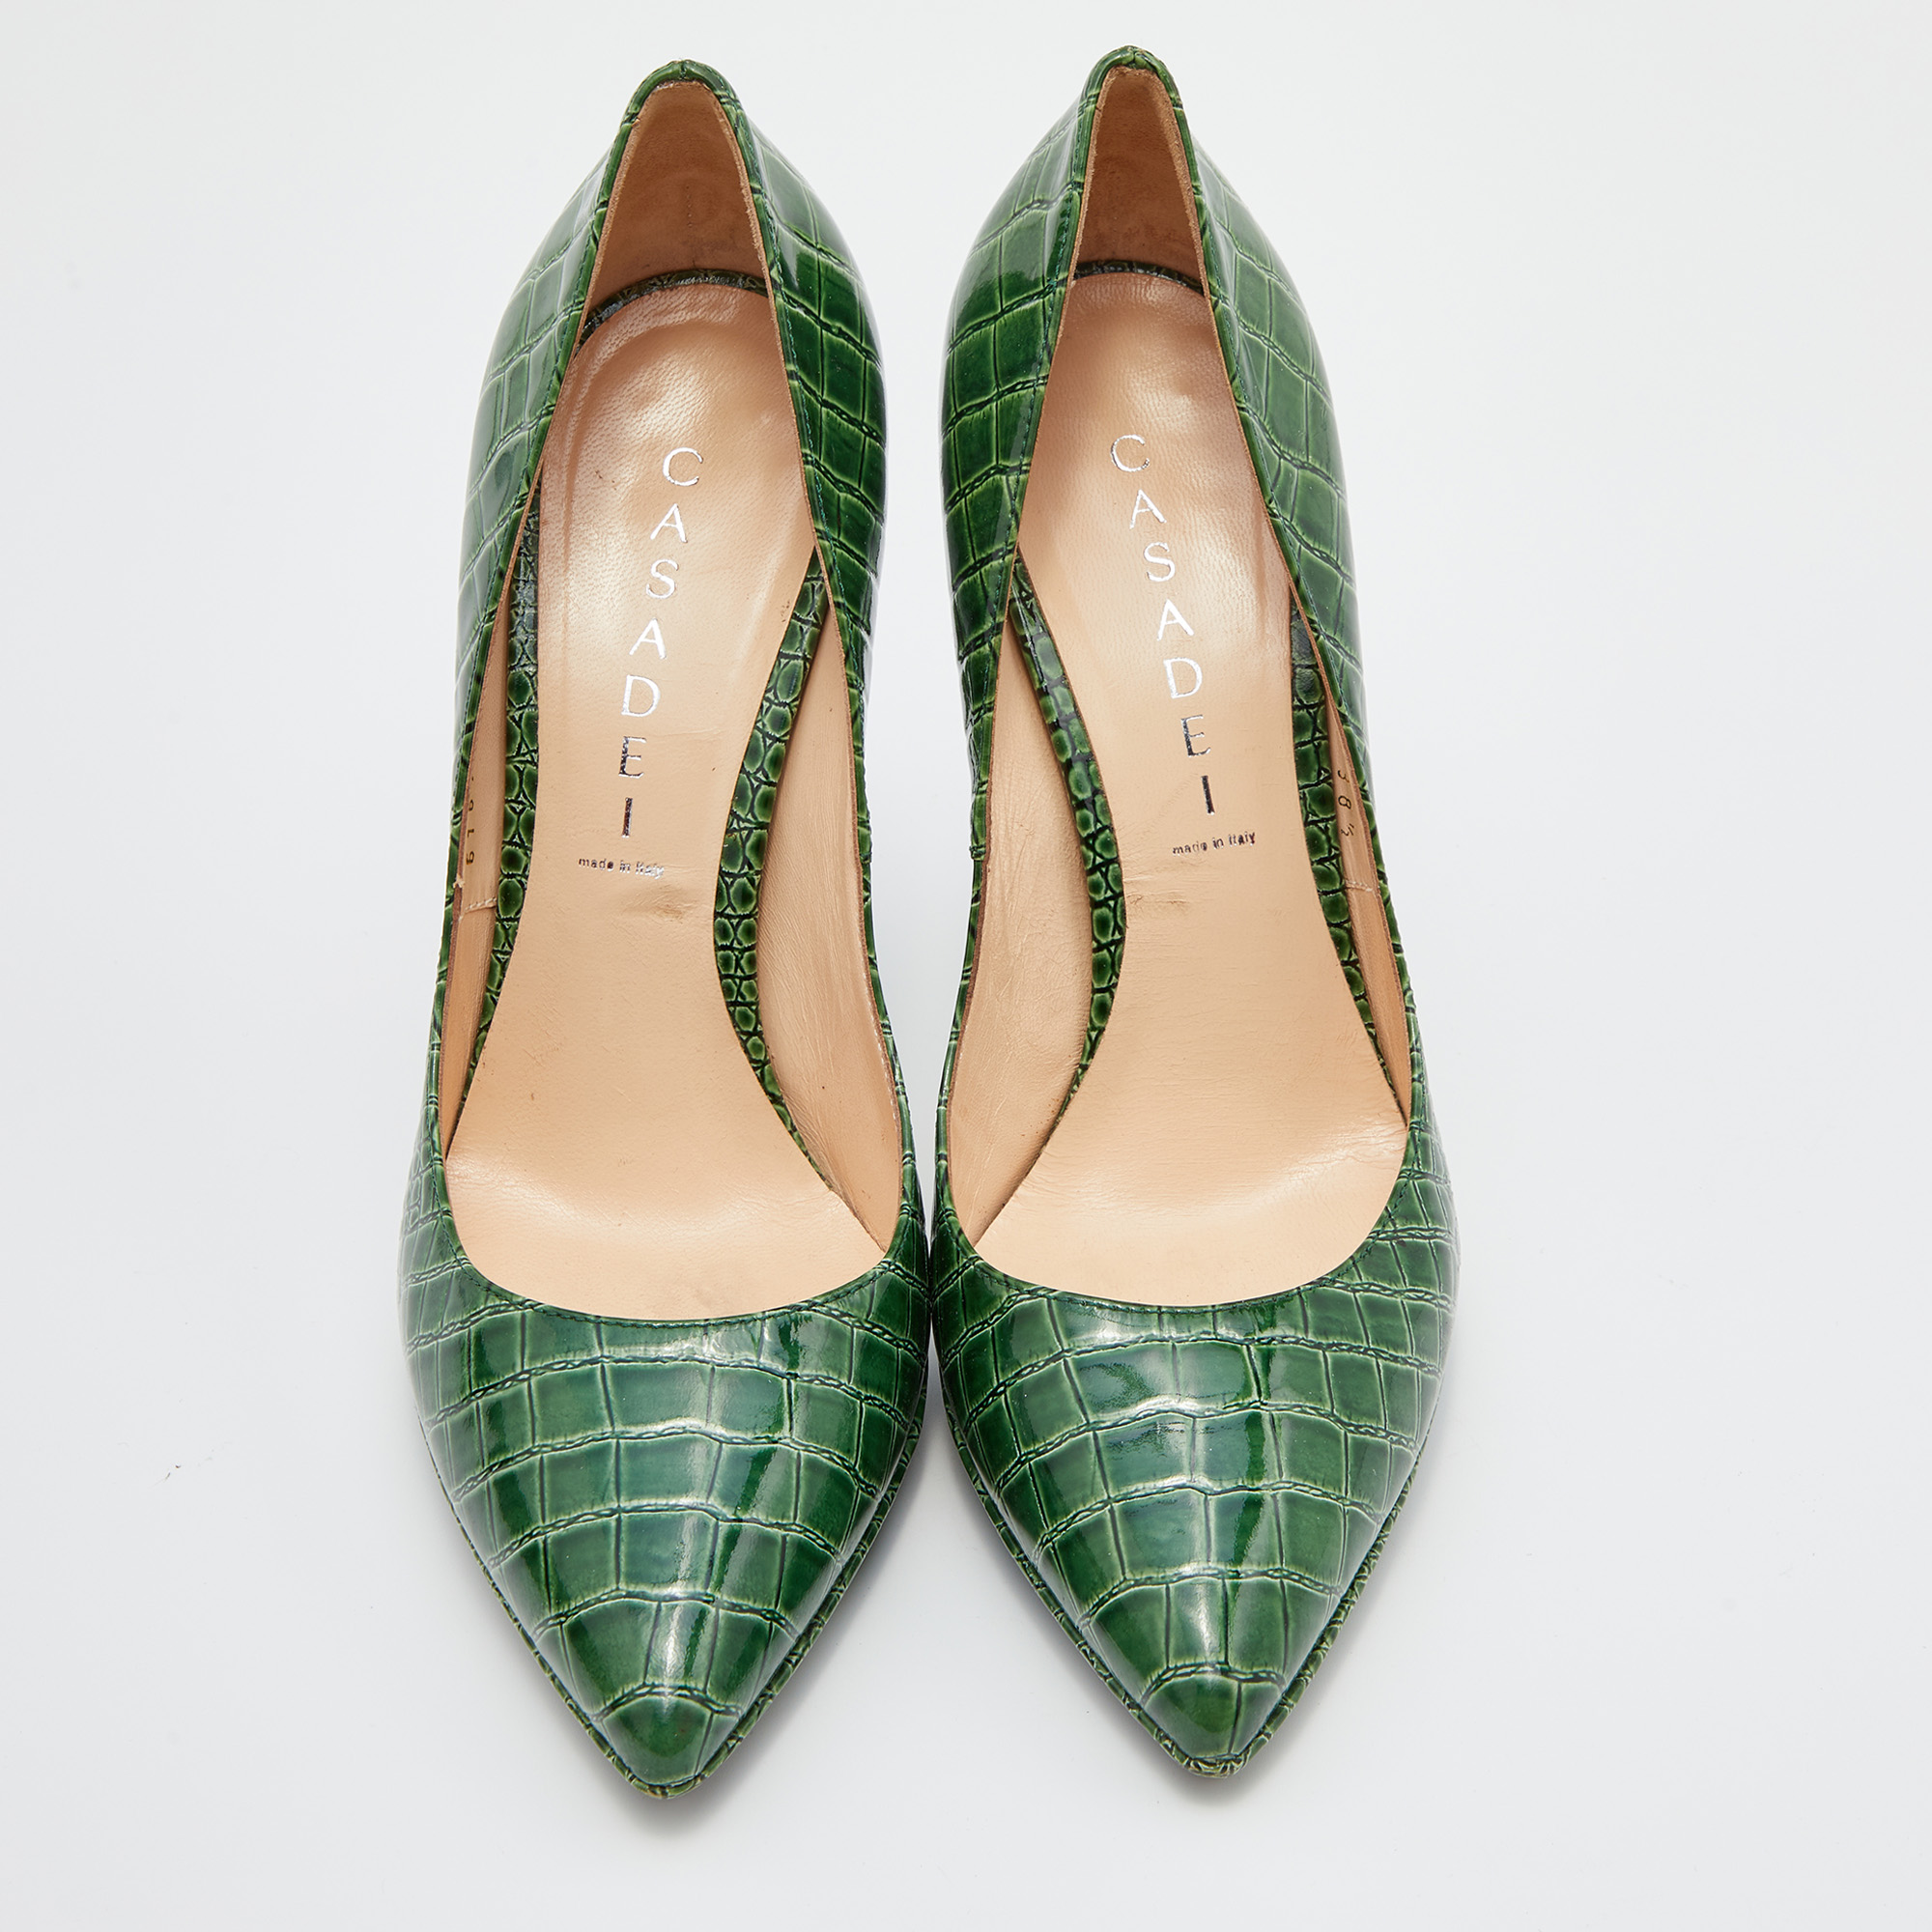 Casadei Green Croc Embossed Patent Leather Pointed Toe Pumps Size 38.5